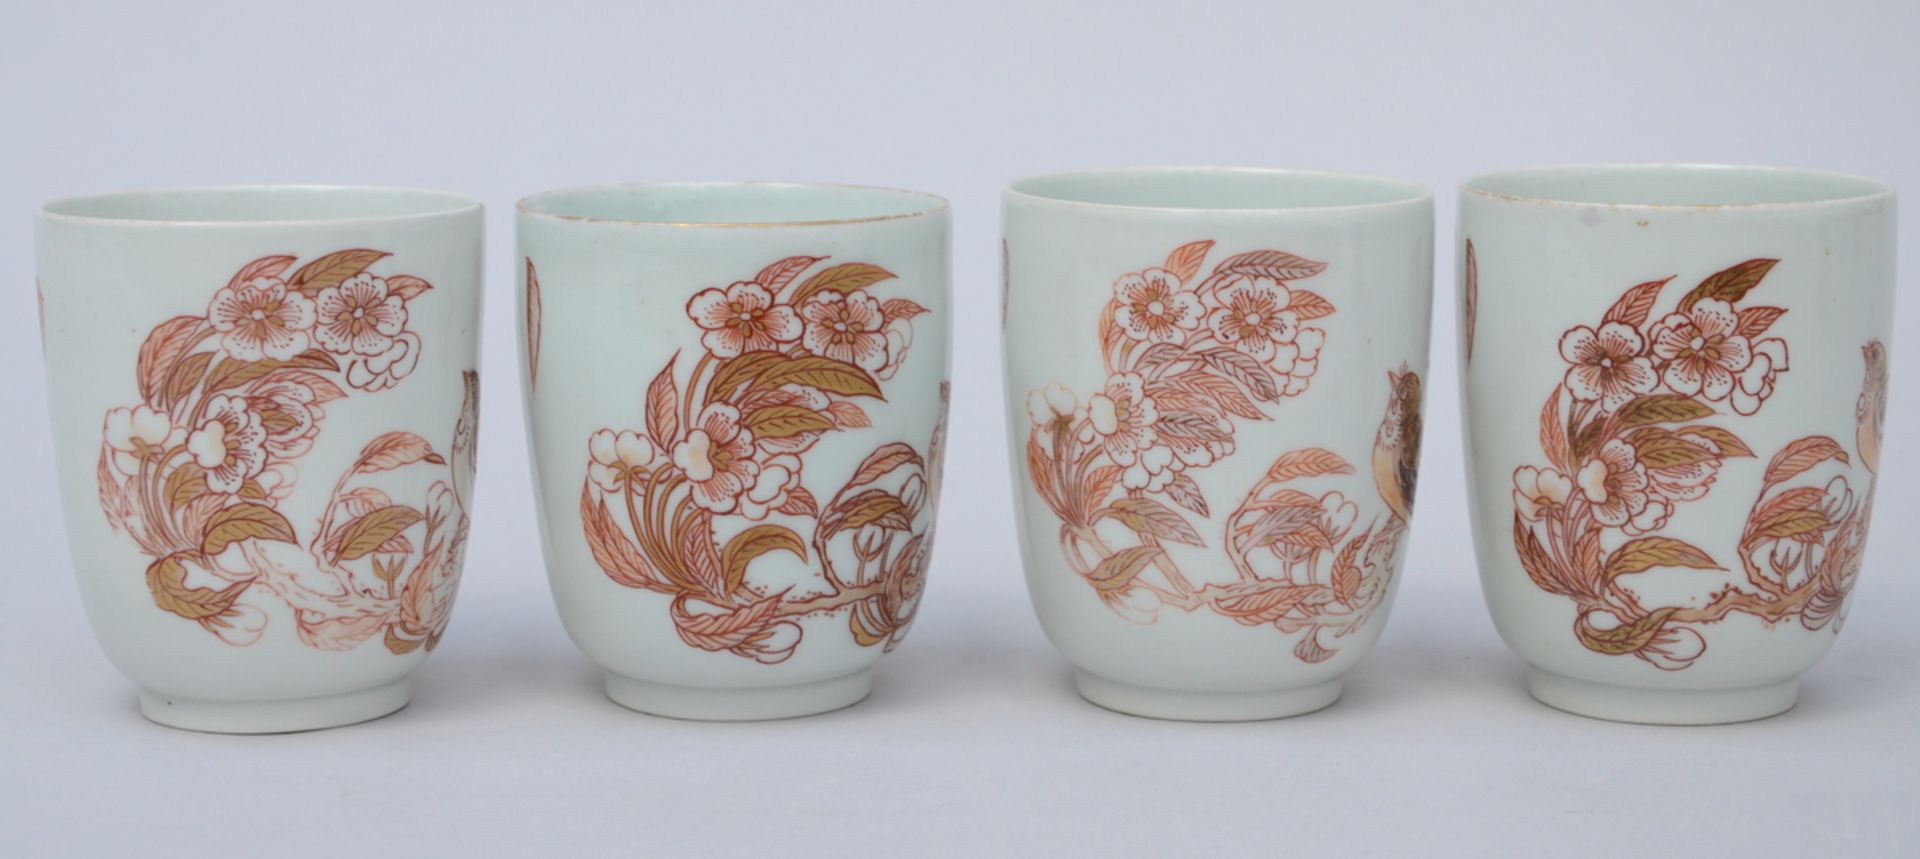 A set of 4 cups in oriental porcelain 'birds and calligraphy' (9x8cm) (*) - Image 2 of 6